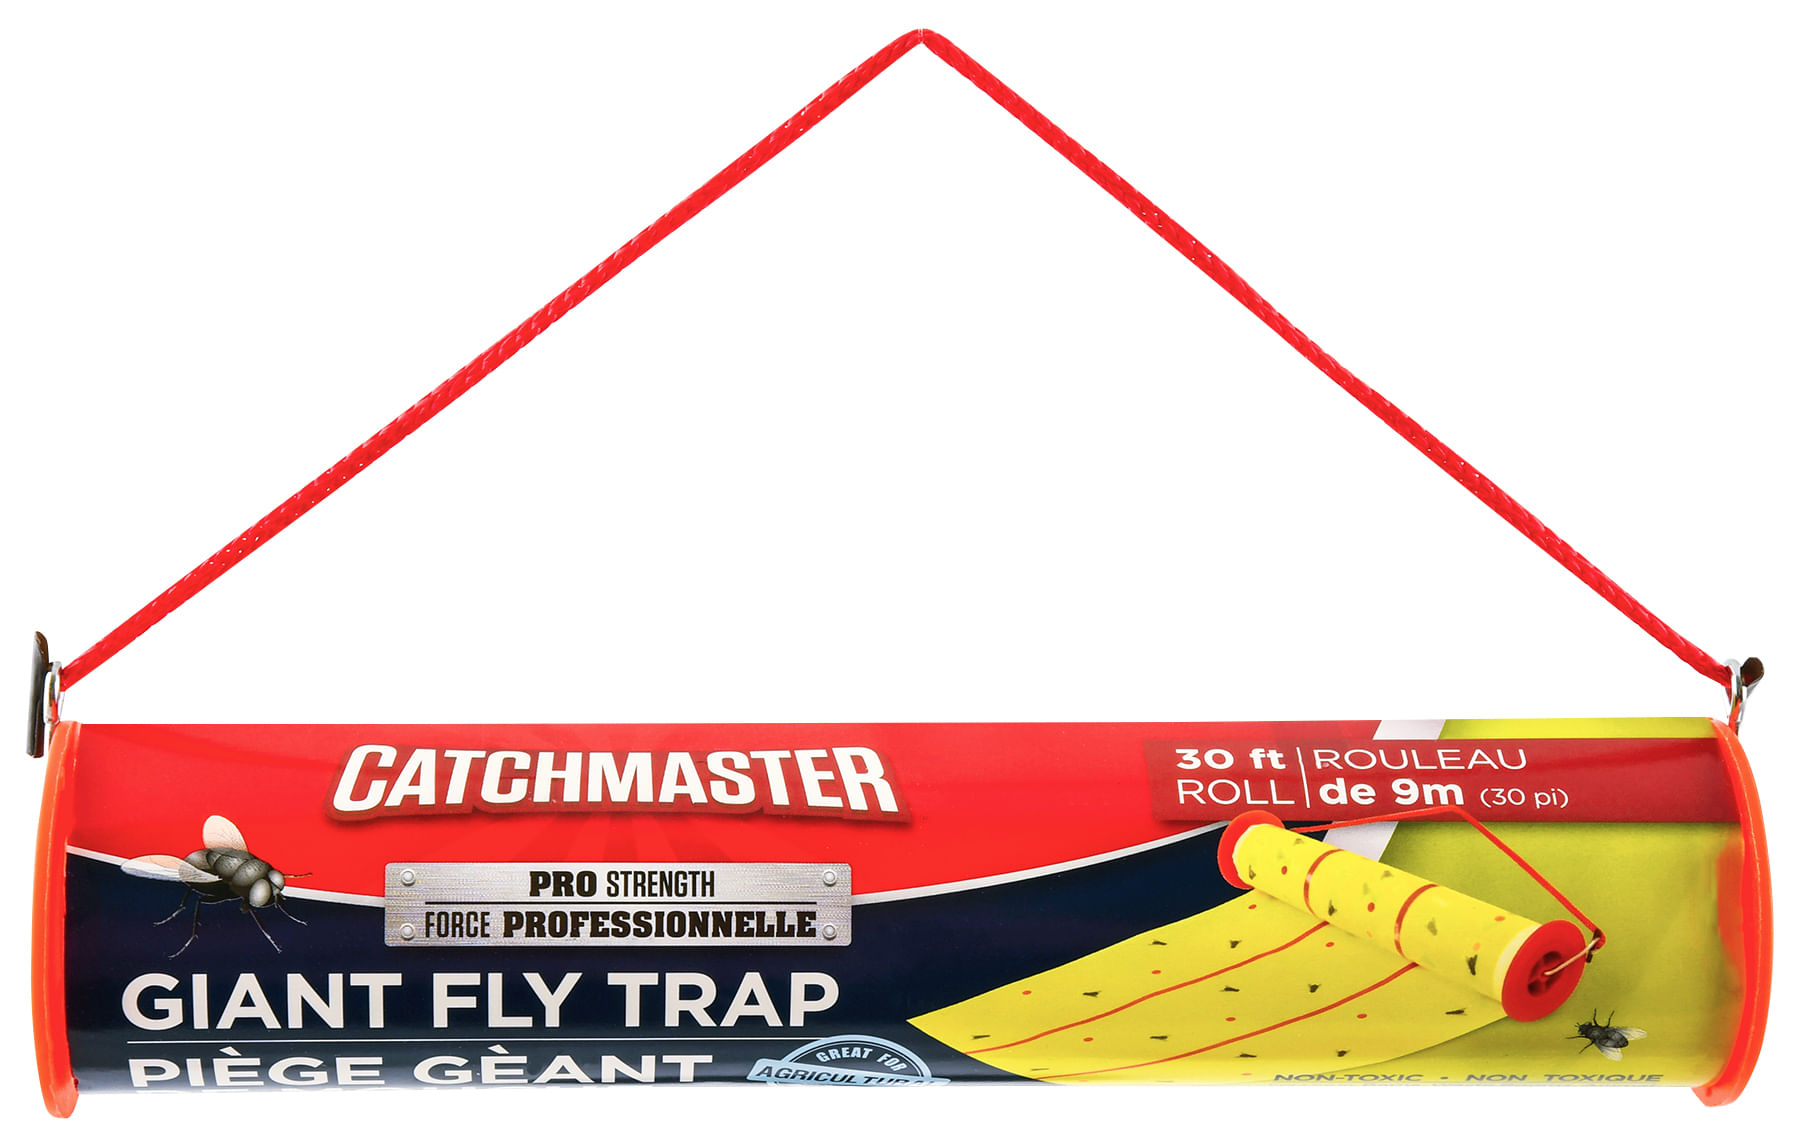 Catchmaster Giant Fly Trap Roll 